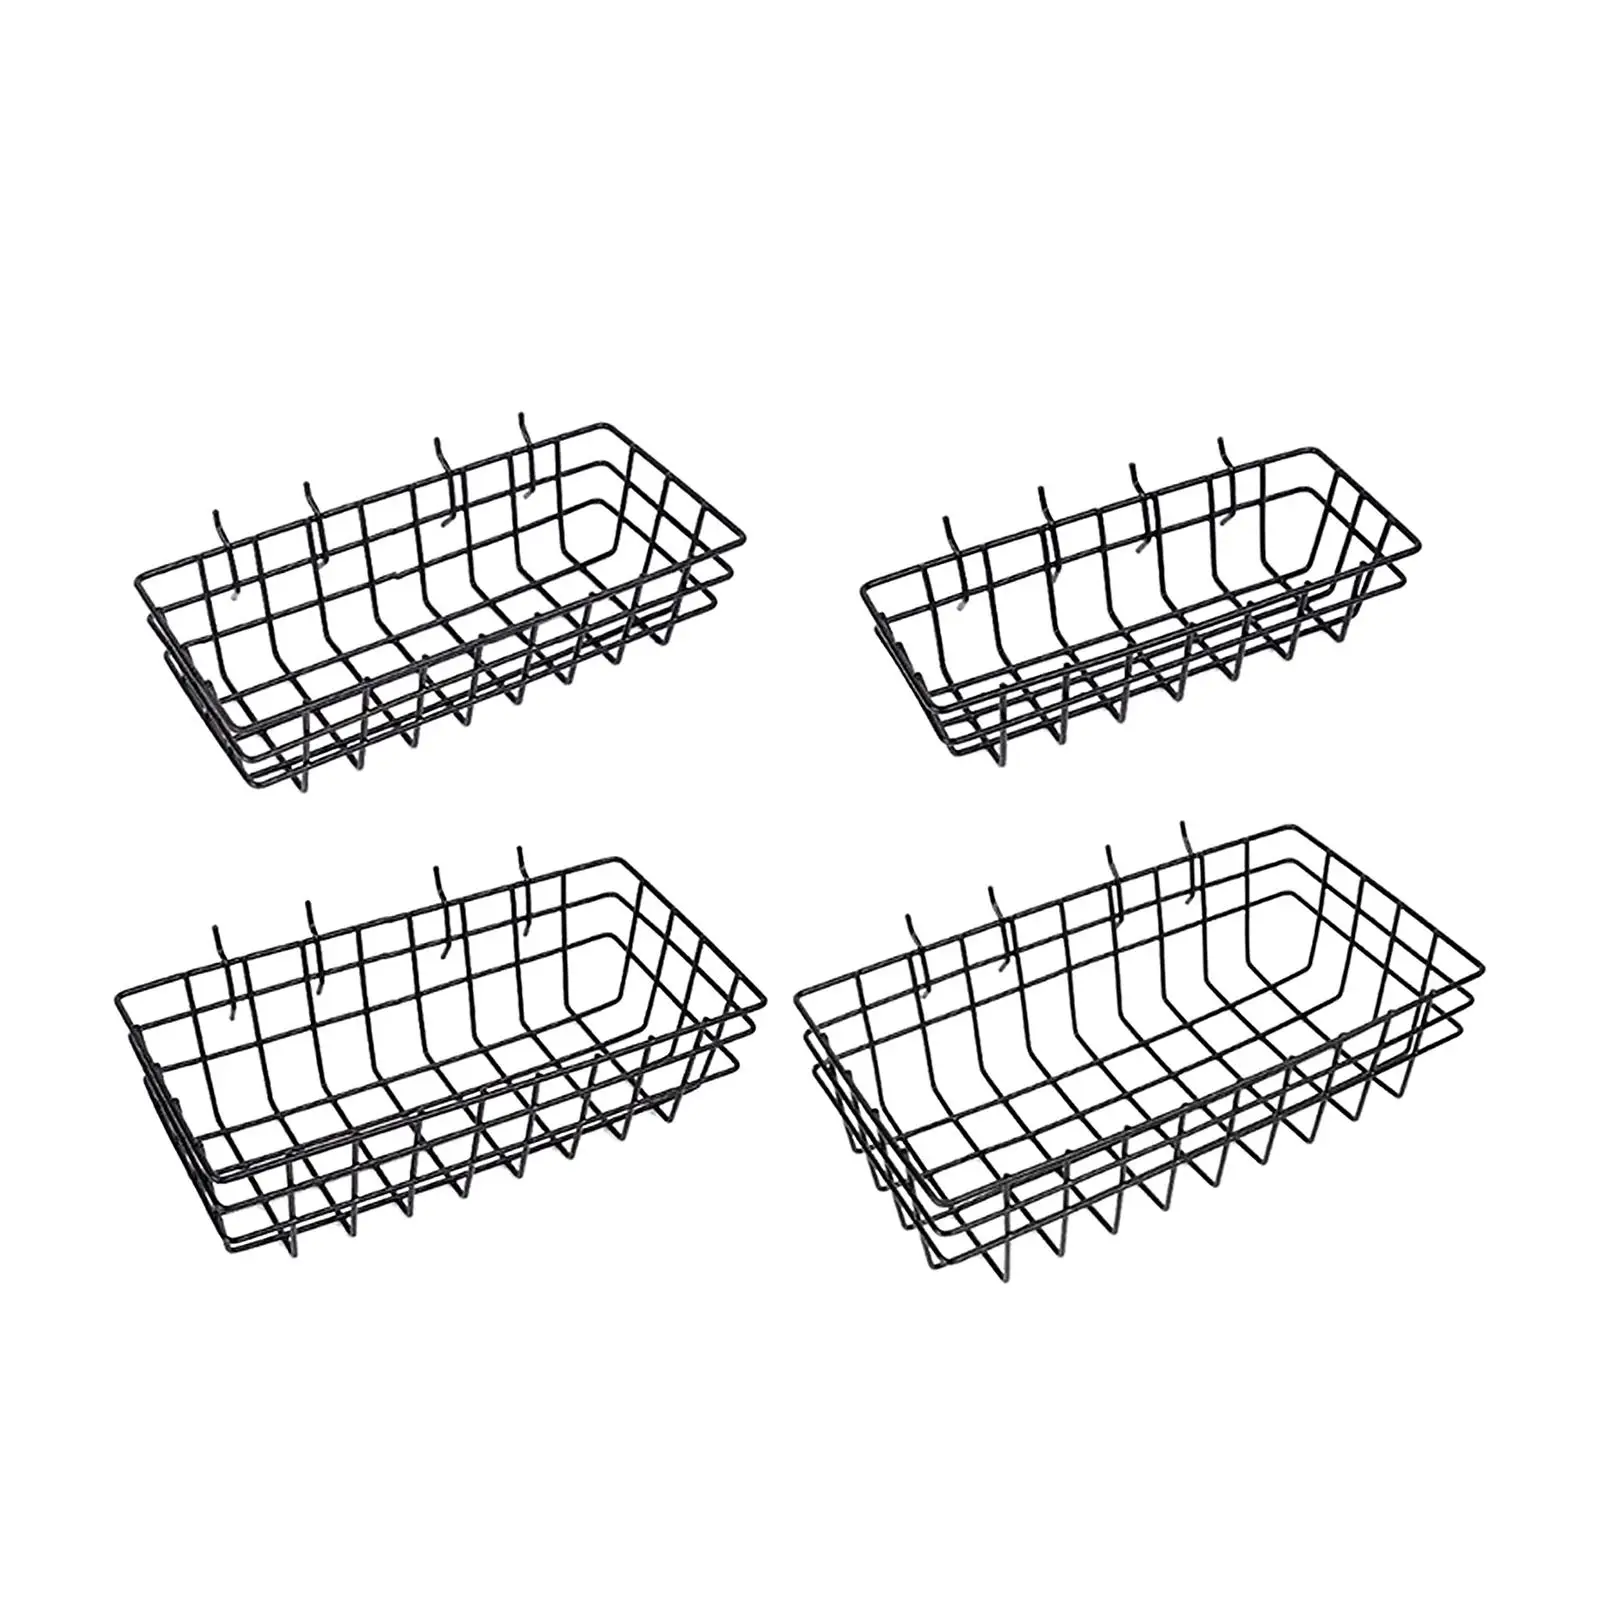 

4x Pegboard Baskets Bins Set Hooks to Any Peg Board Pegboard Accessories for Workbench Tools Shop Garage Storage Craft Room